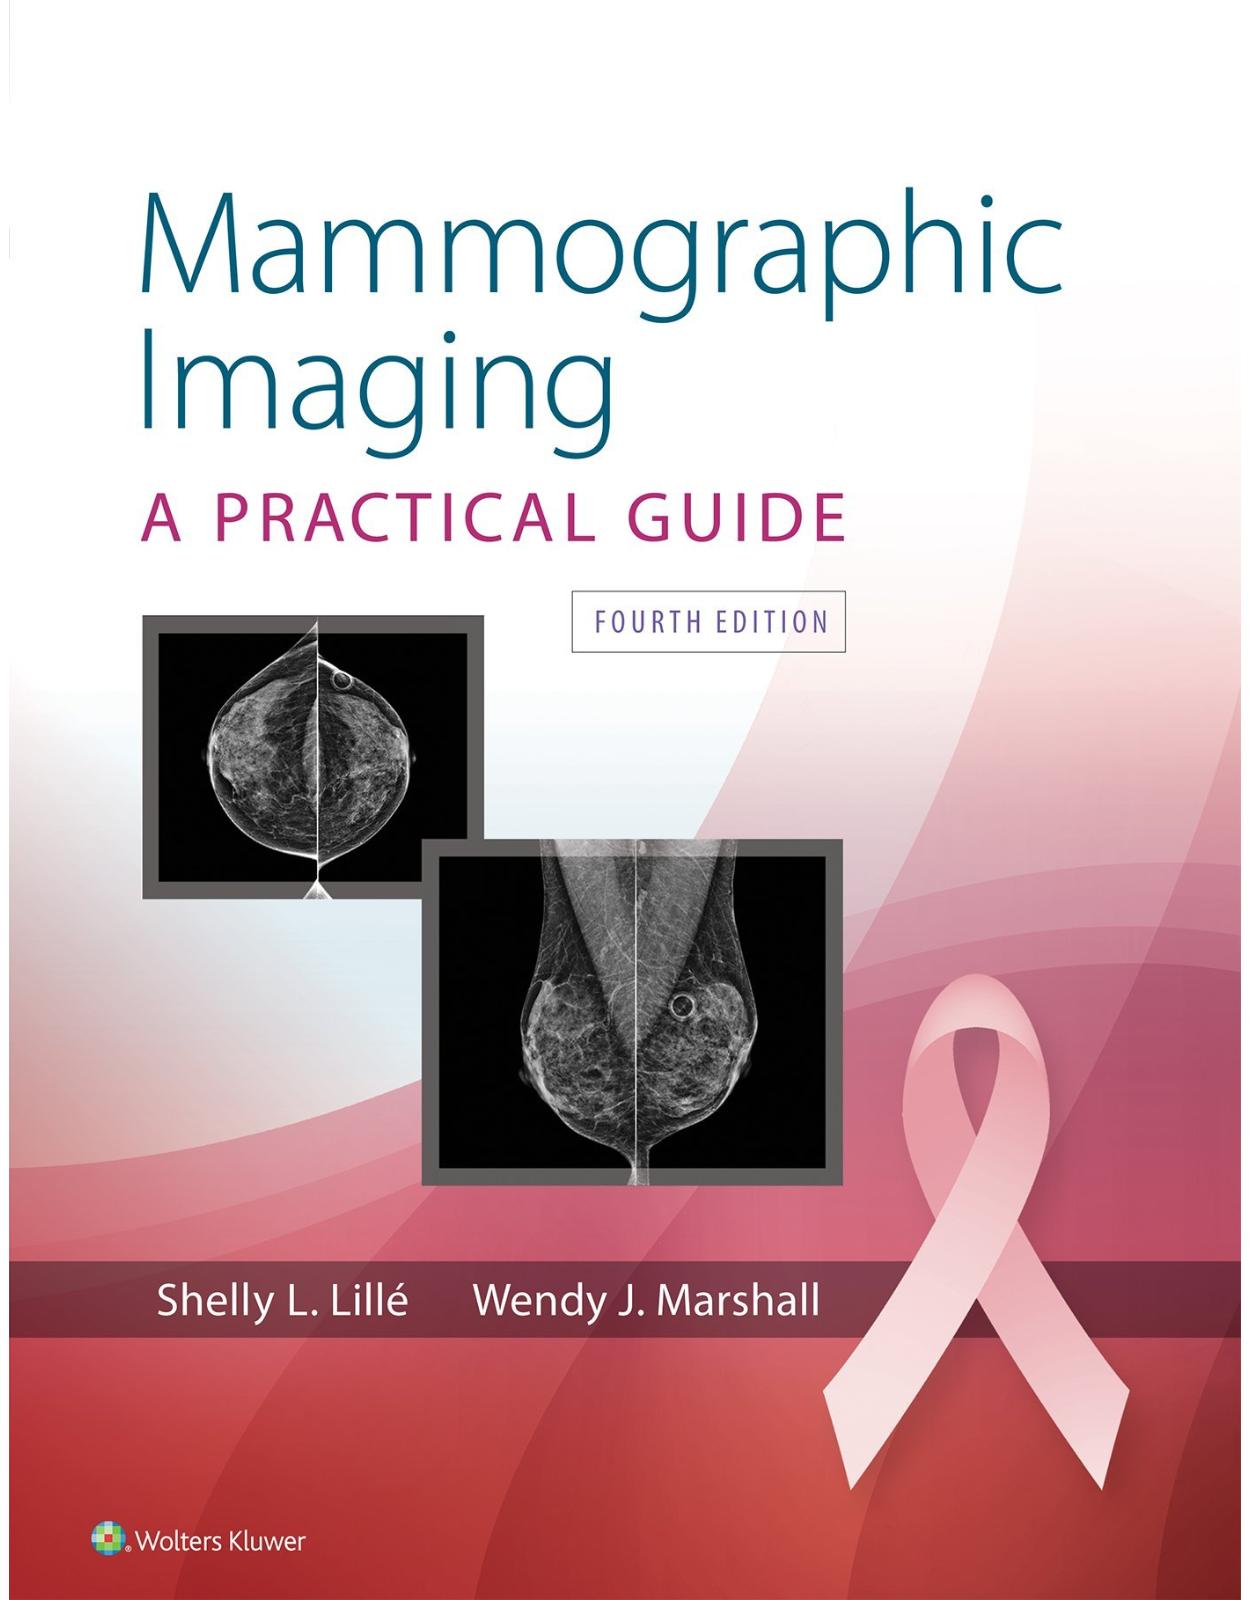 Mammographic Imaging, Fourth edition